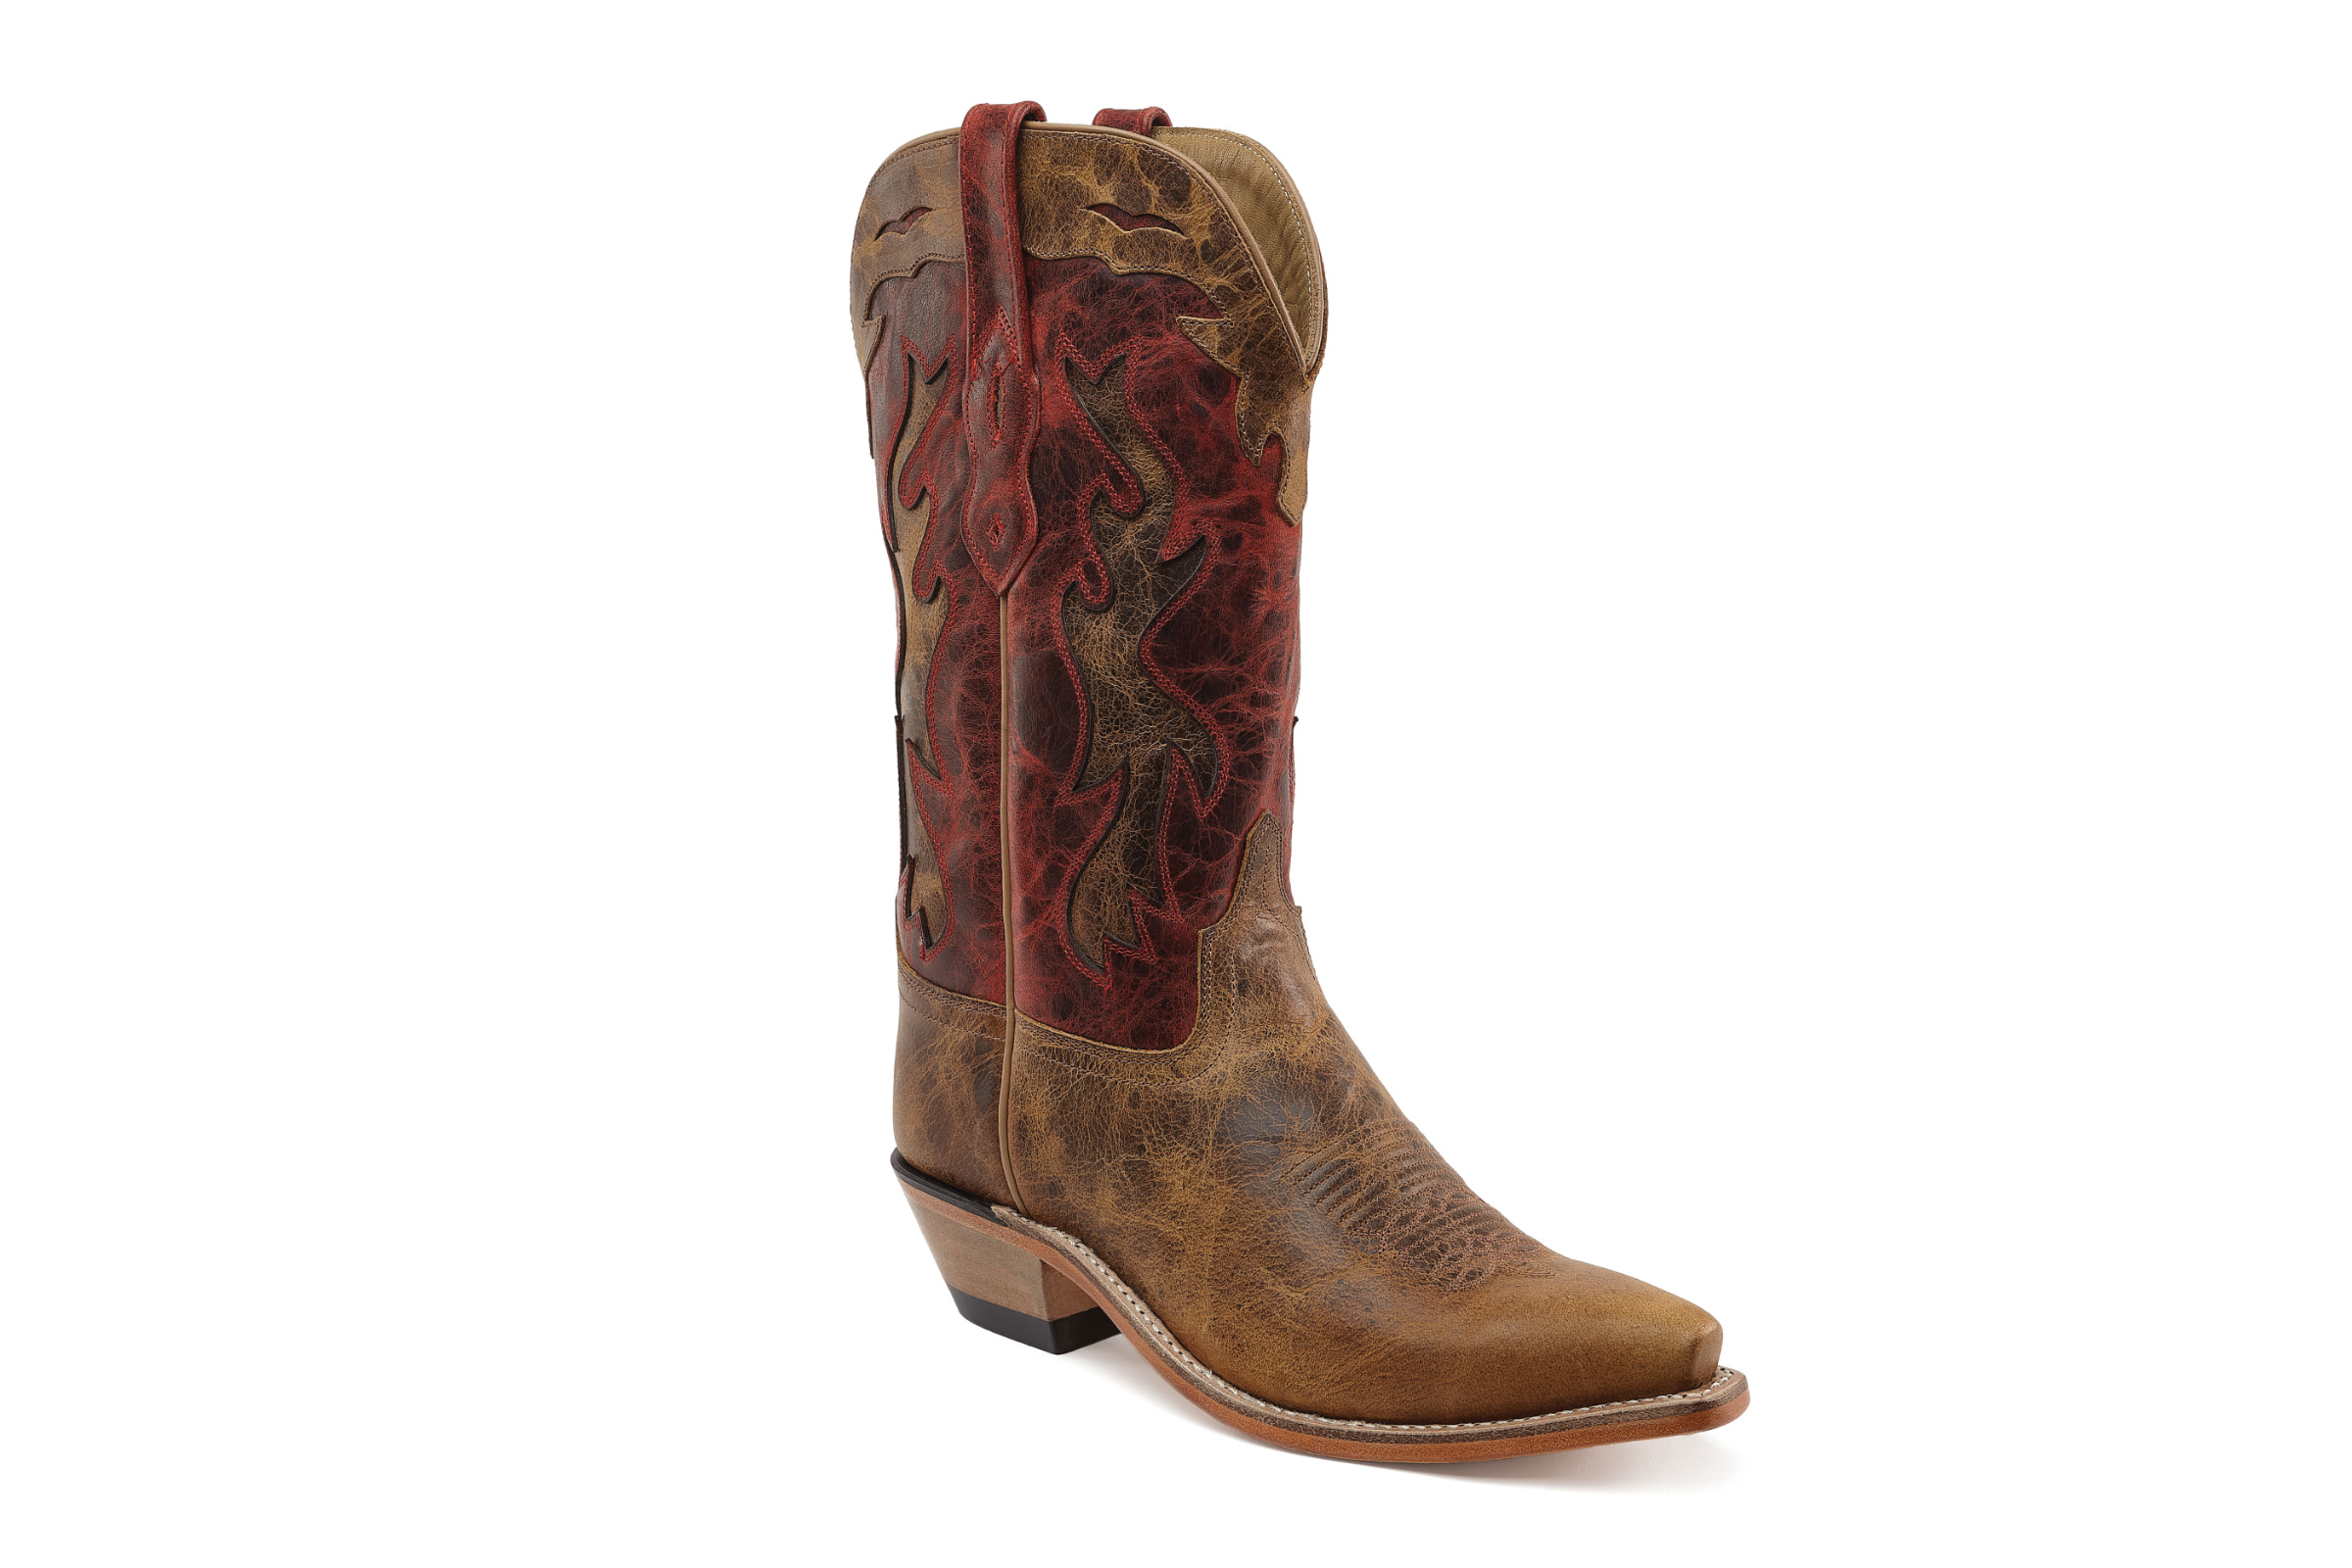 Ladies cowboy boots LF1627E, Fox Cave, brown/red